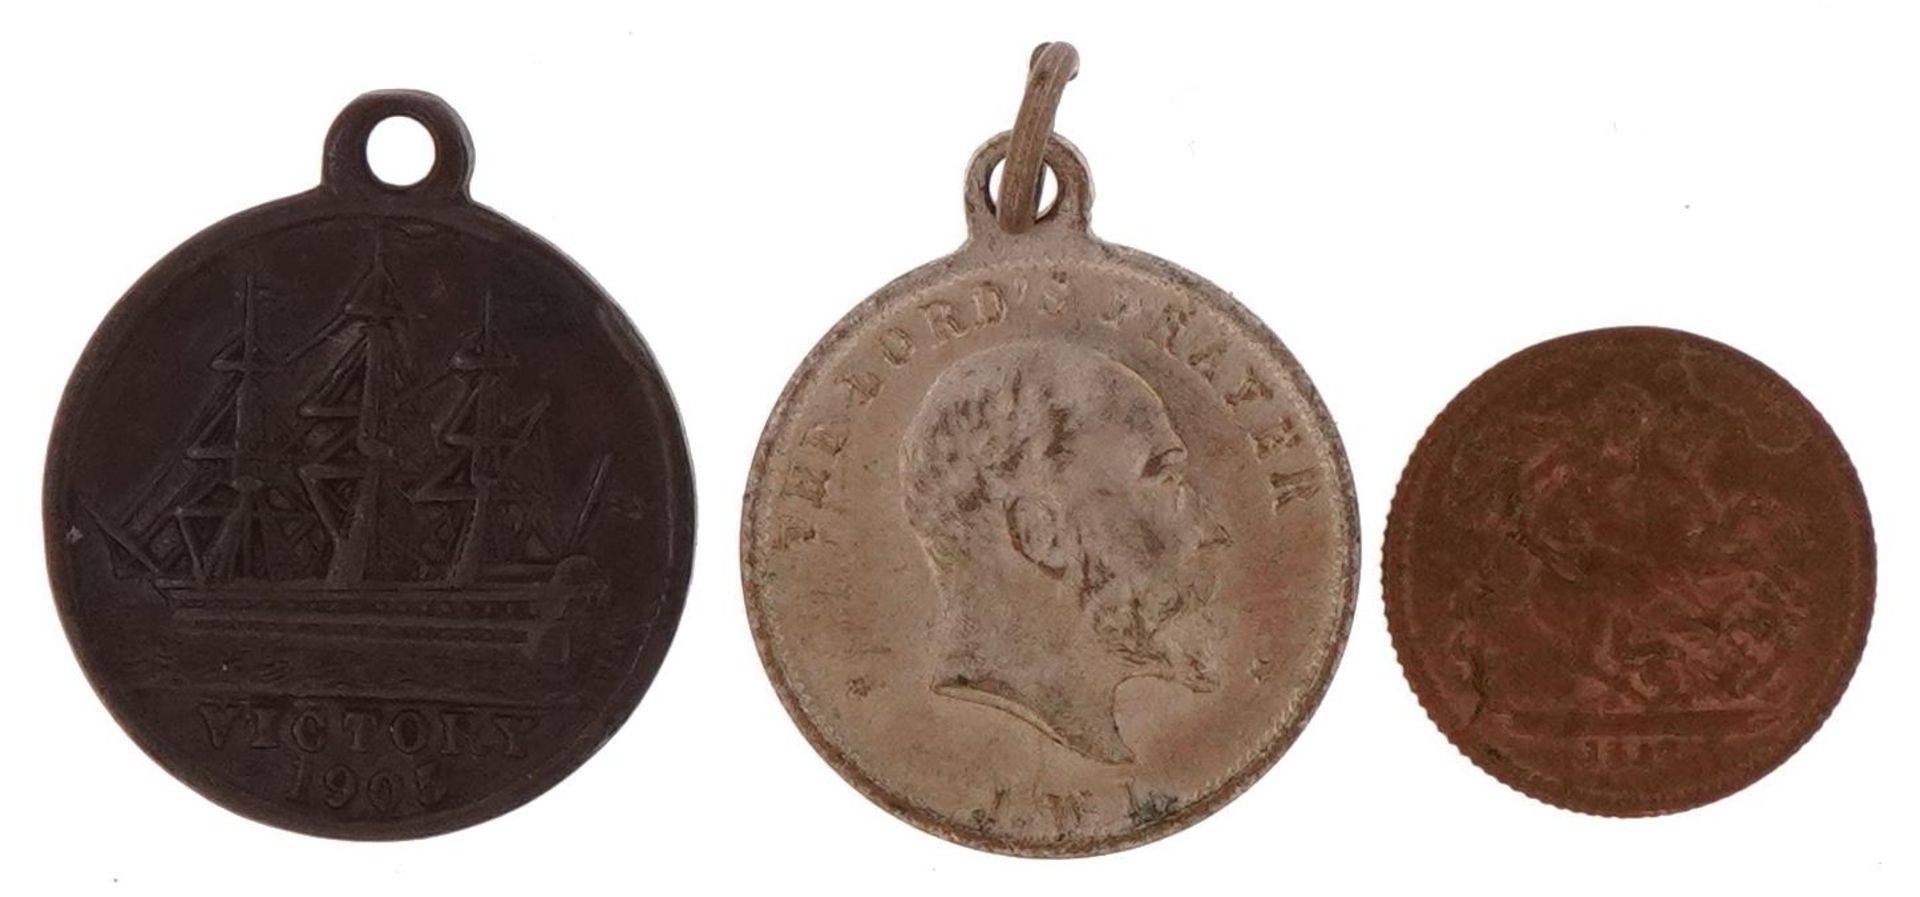 Two commemorative medallions and a coin including naval interest Nelson's Centenary containing